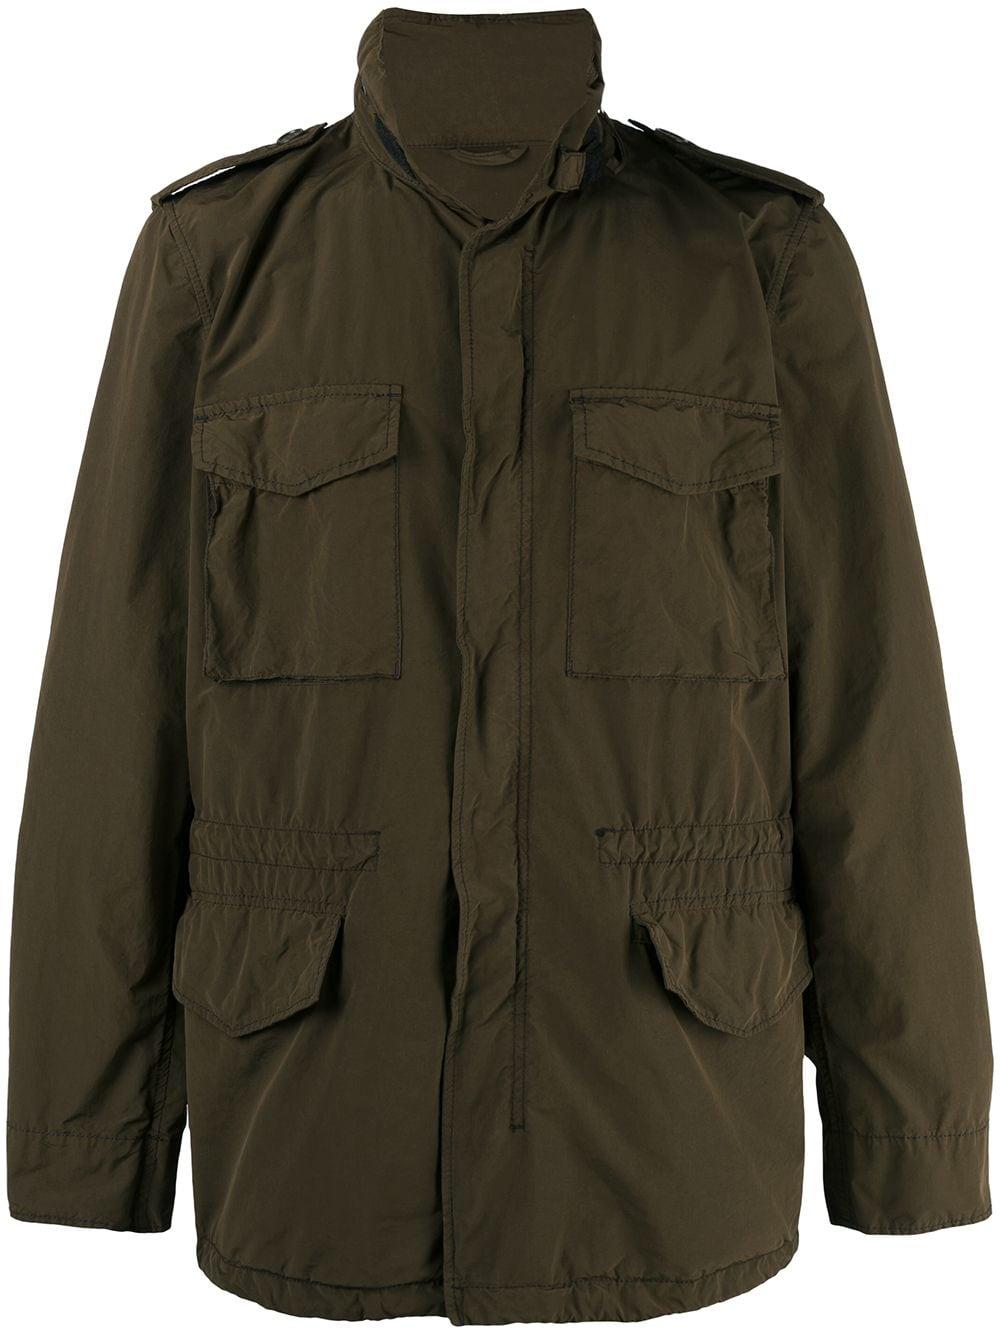 Aspesi Synthetic High Collar Military Jacket in Green for Men - Lyst